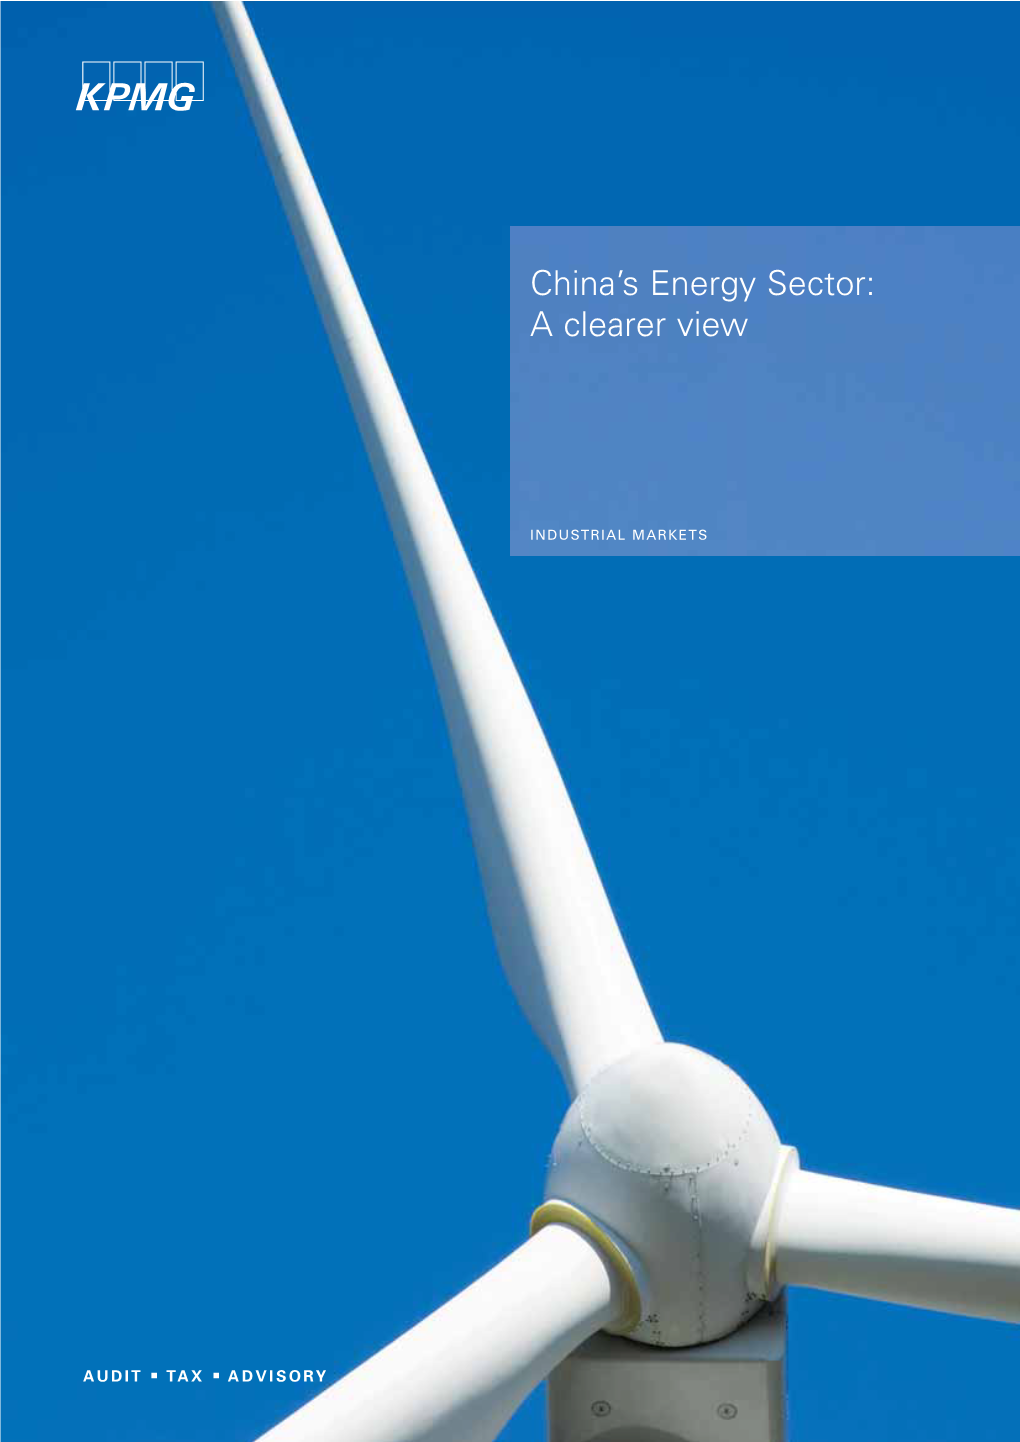 China's Energy Sector